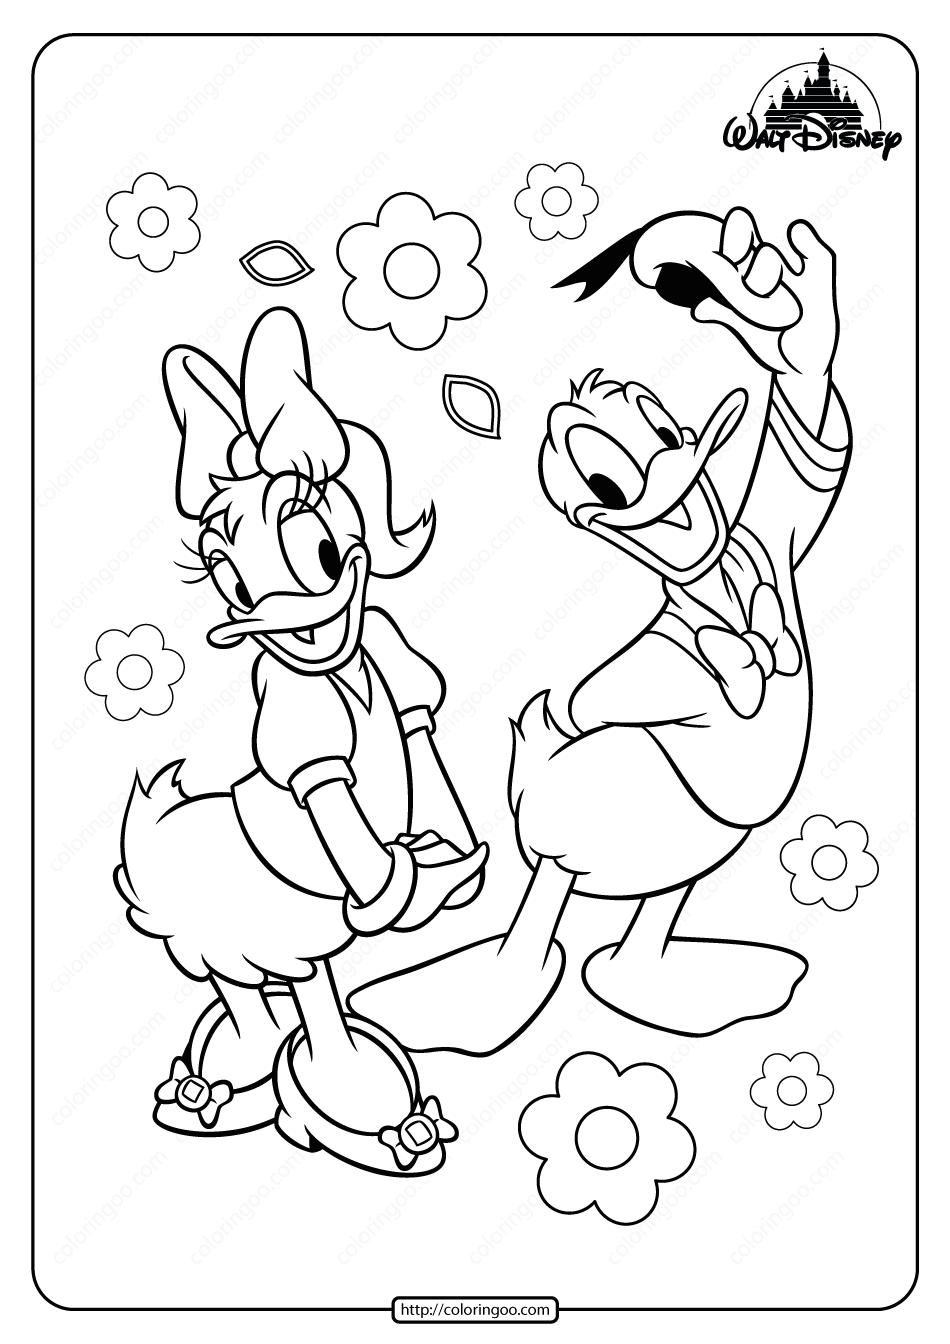 printable daisy and donald duck coloring page